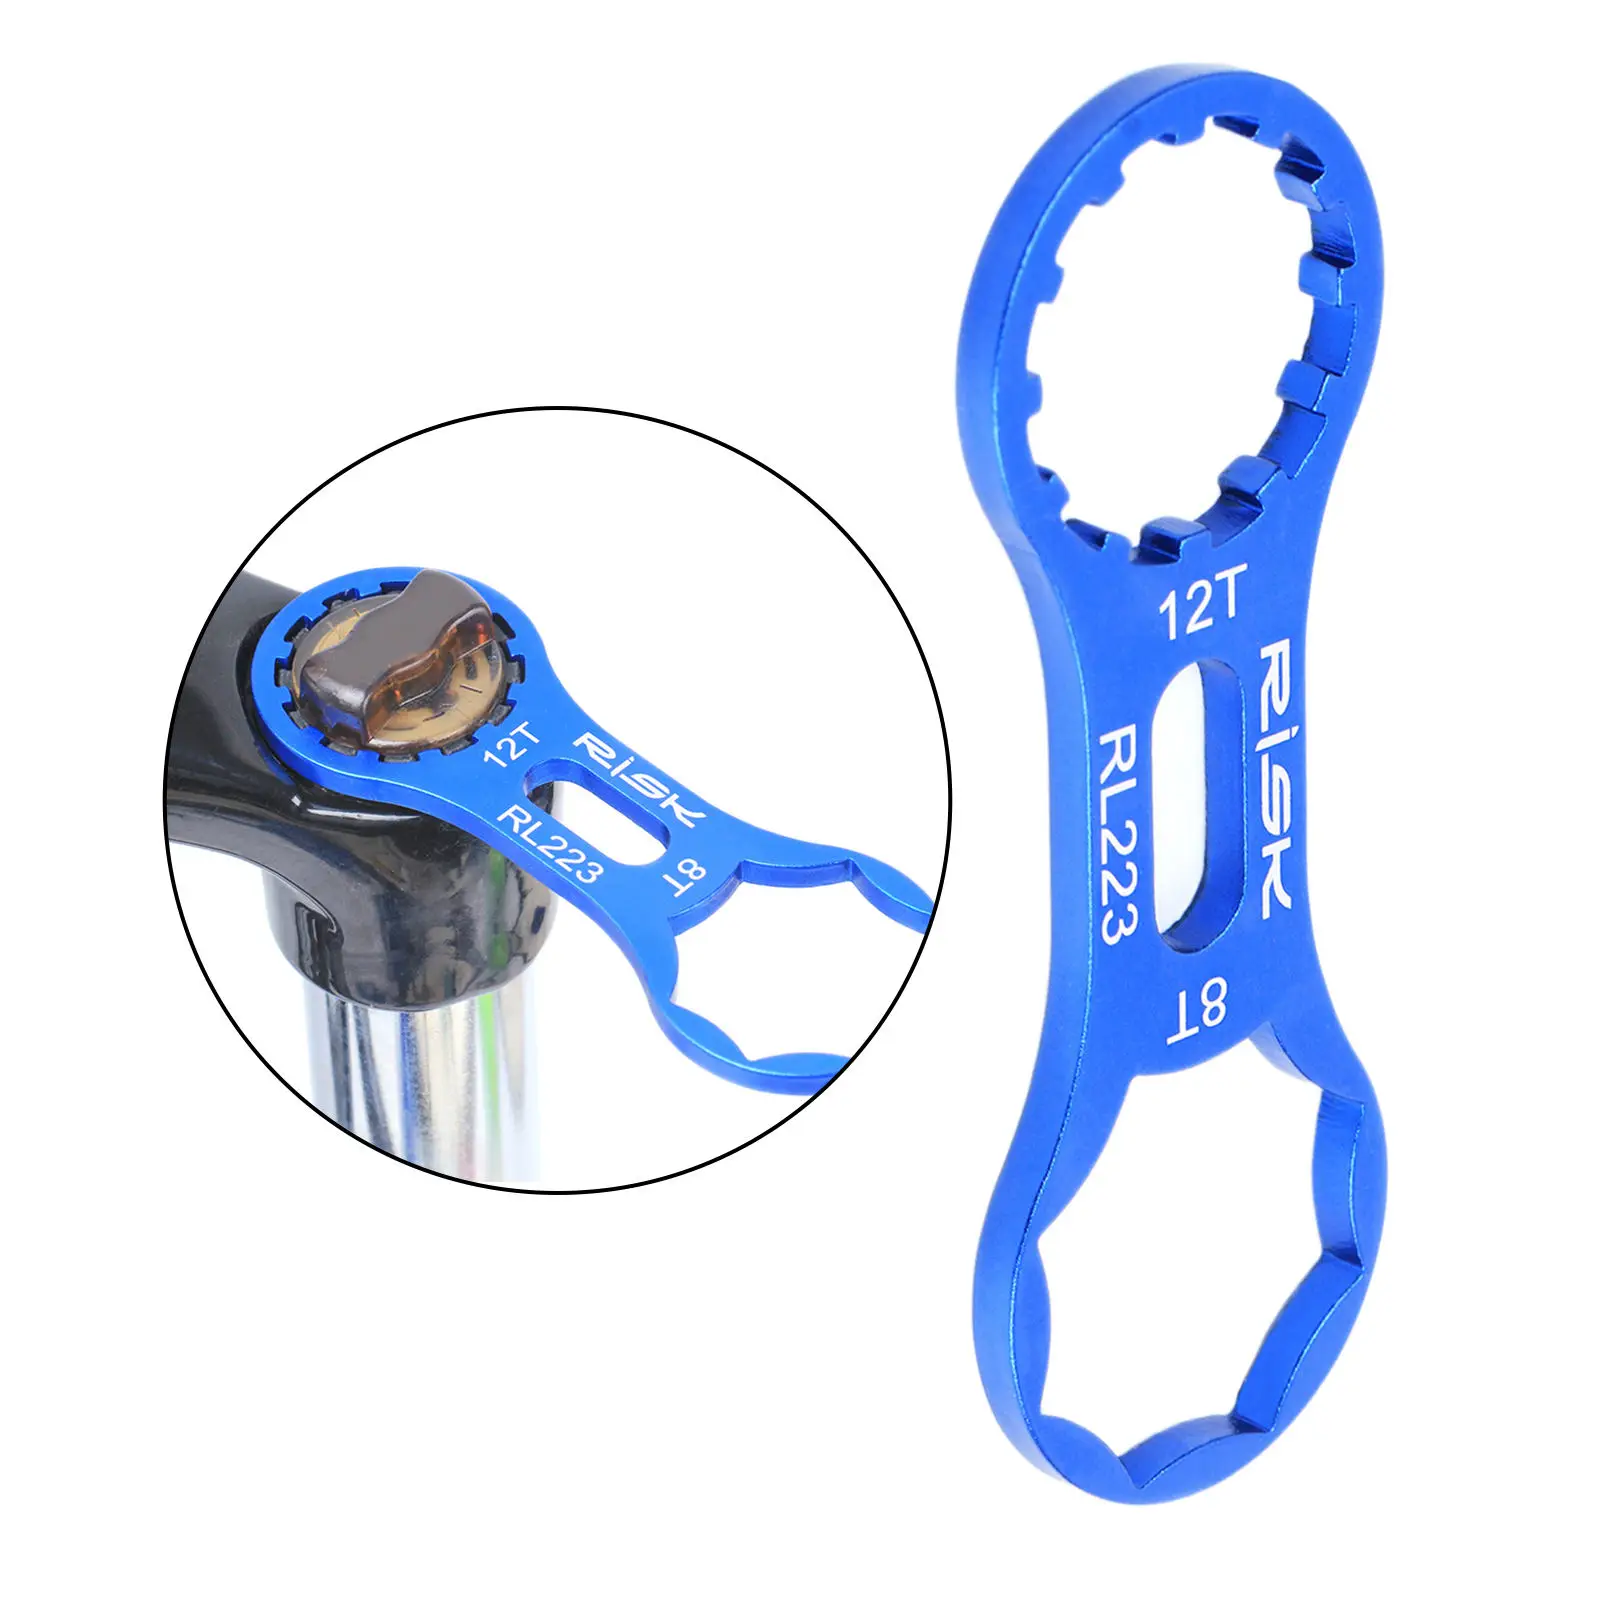 8T/12T Dirt Bike Remover Repair Tool MTB Bike Fork  Wrench For XCR/XCT/XCM/RST Front Fork, Cycling Bicycle Fork  Spanner